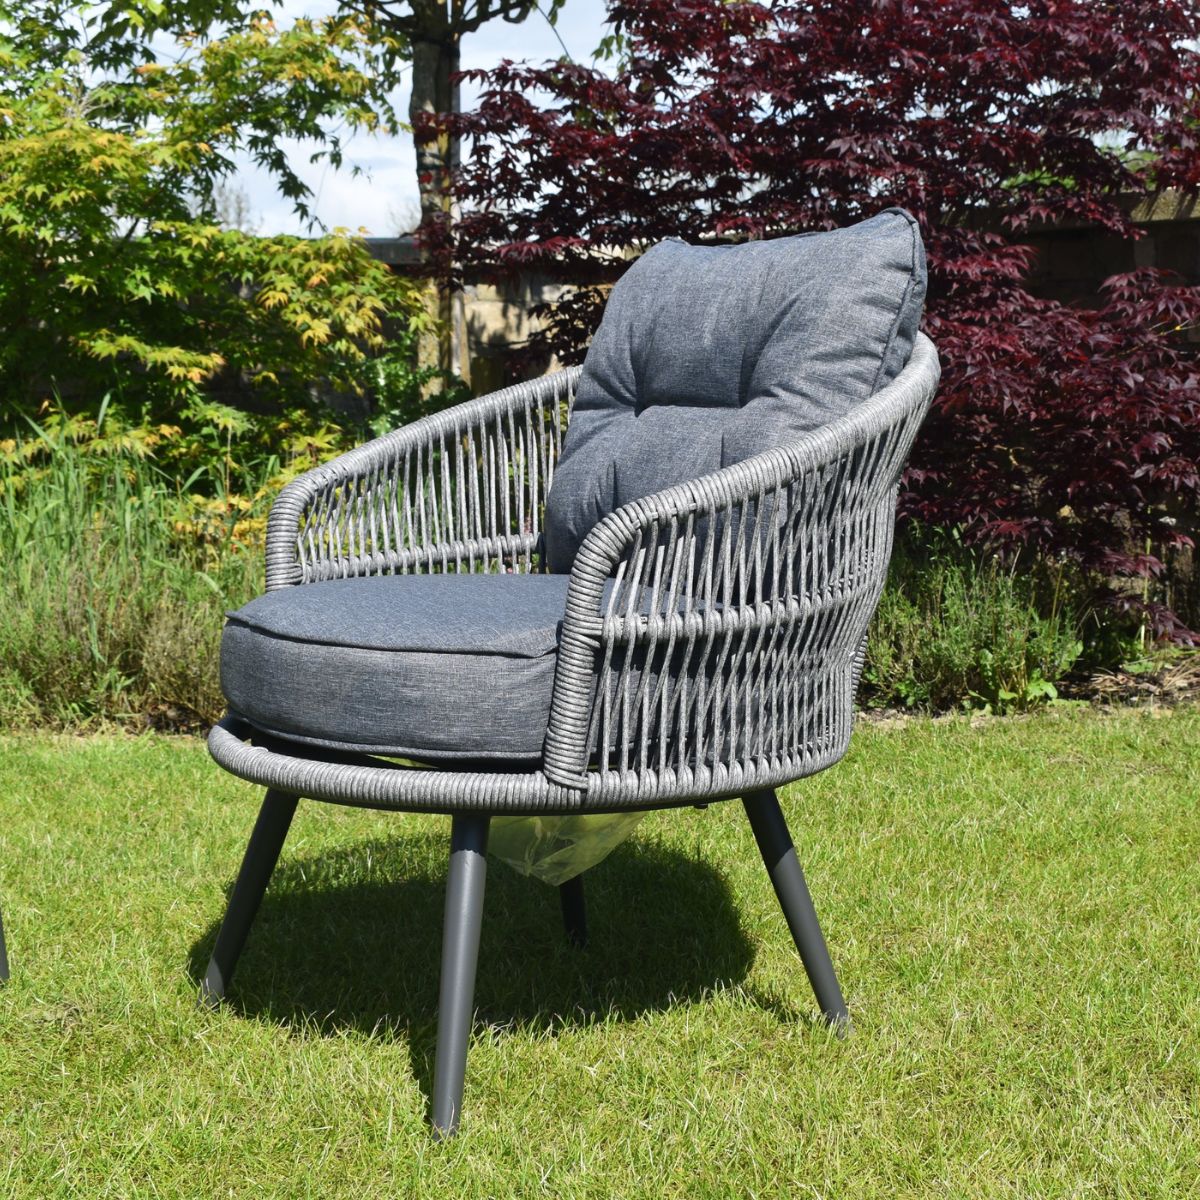 Aghadoe Outdoor Table and Chairs - 3